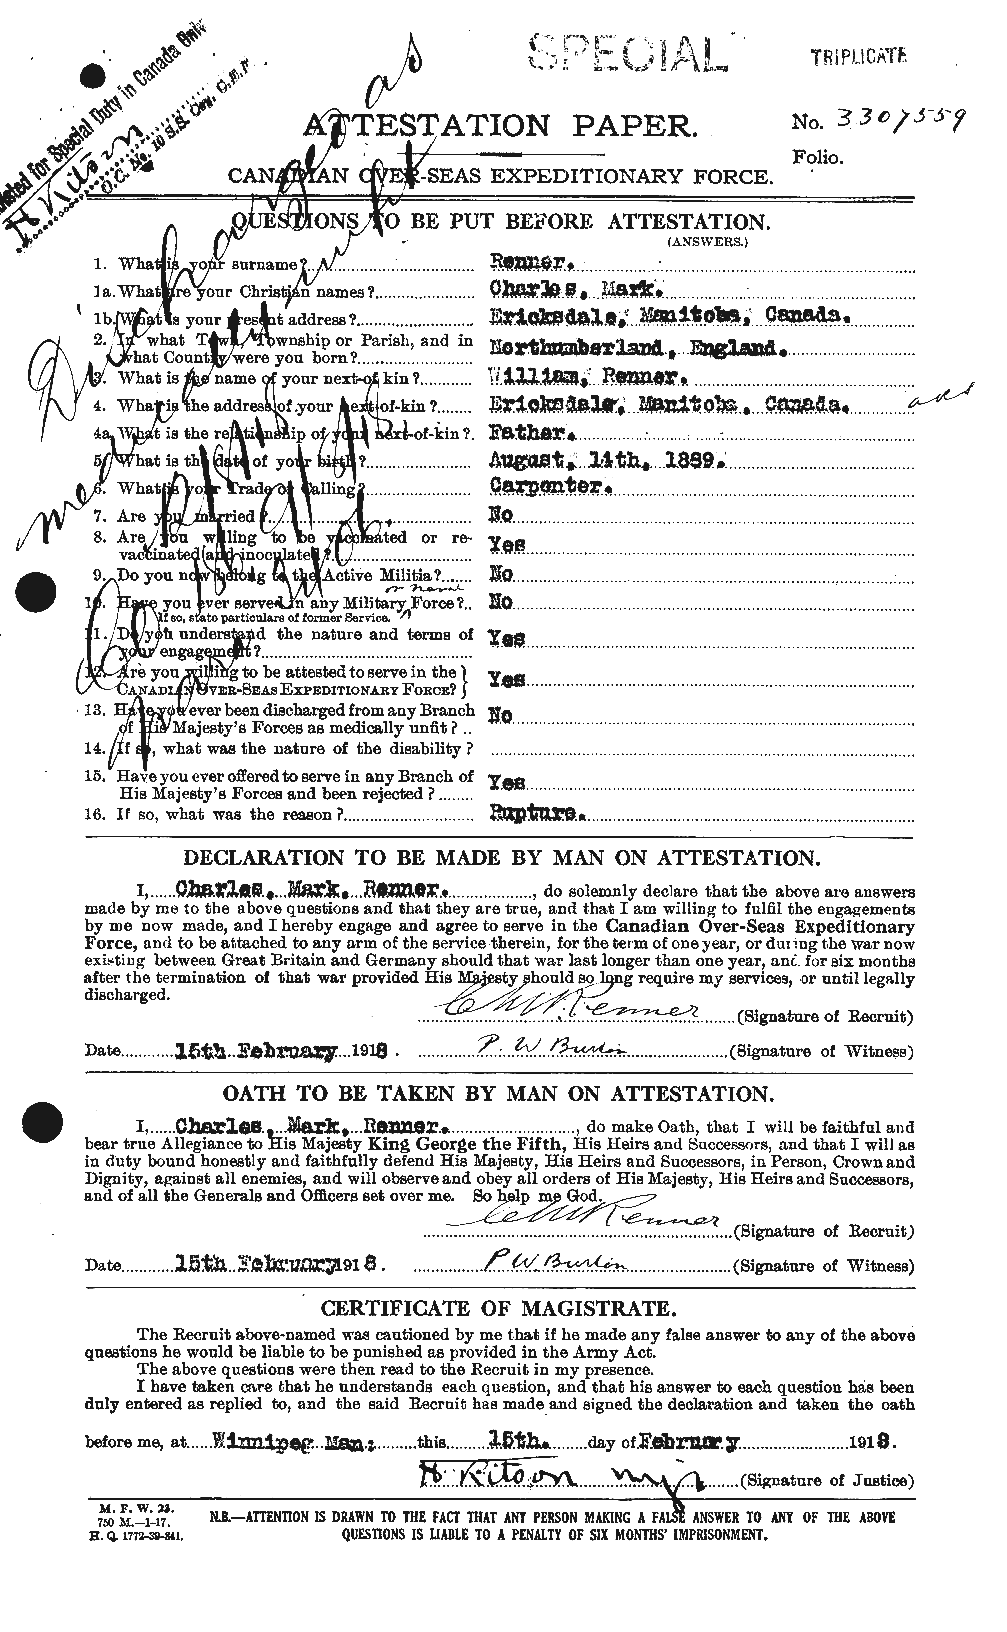 Personnel Records of the First World War - CEF 599860a